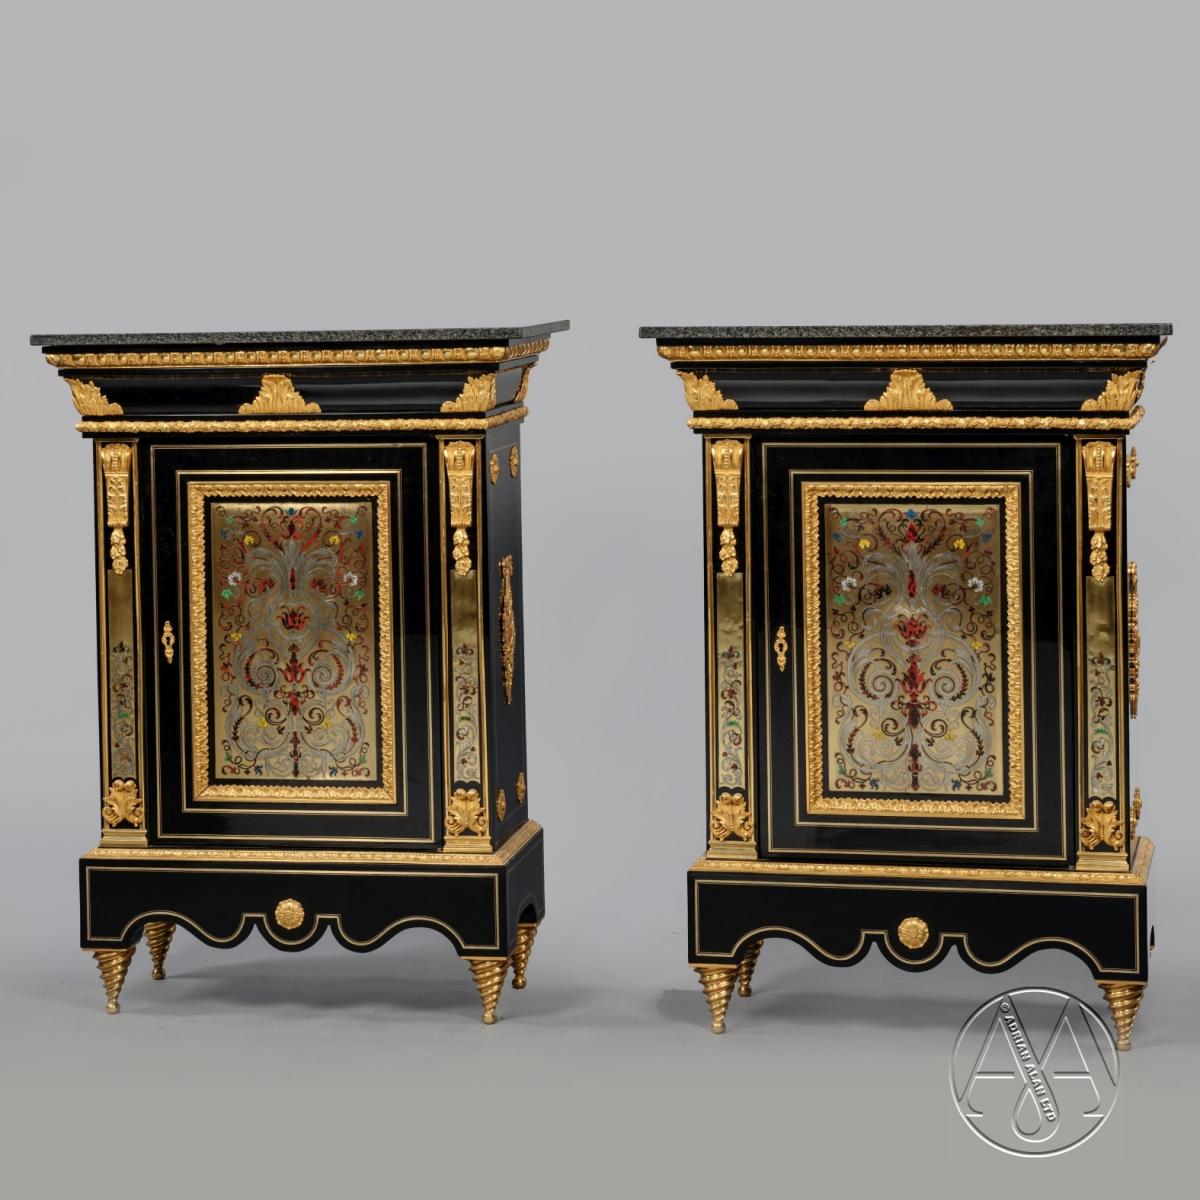 A Pair of Napoleon III Gilt Bronze and Boulle Marquetry Cabinets Dating from Circa 1870